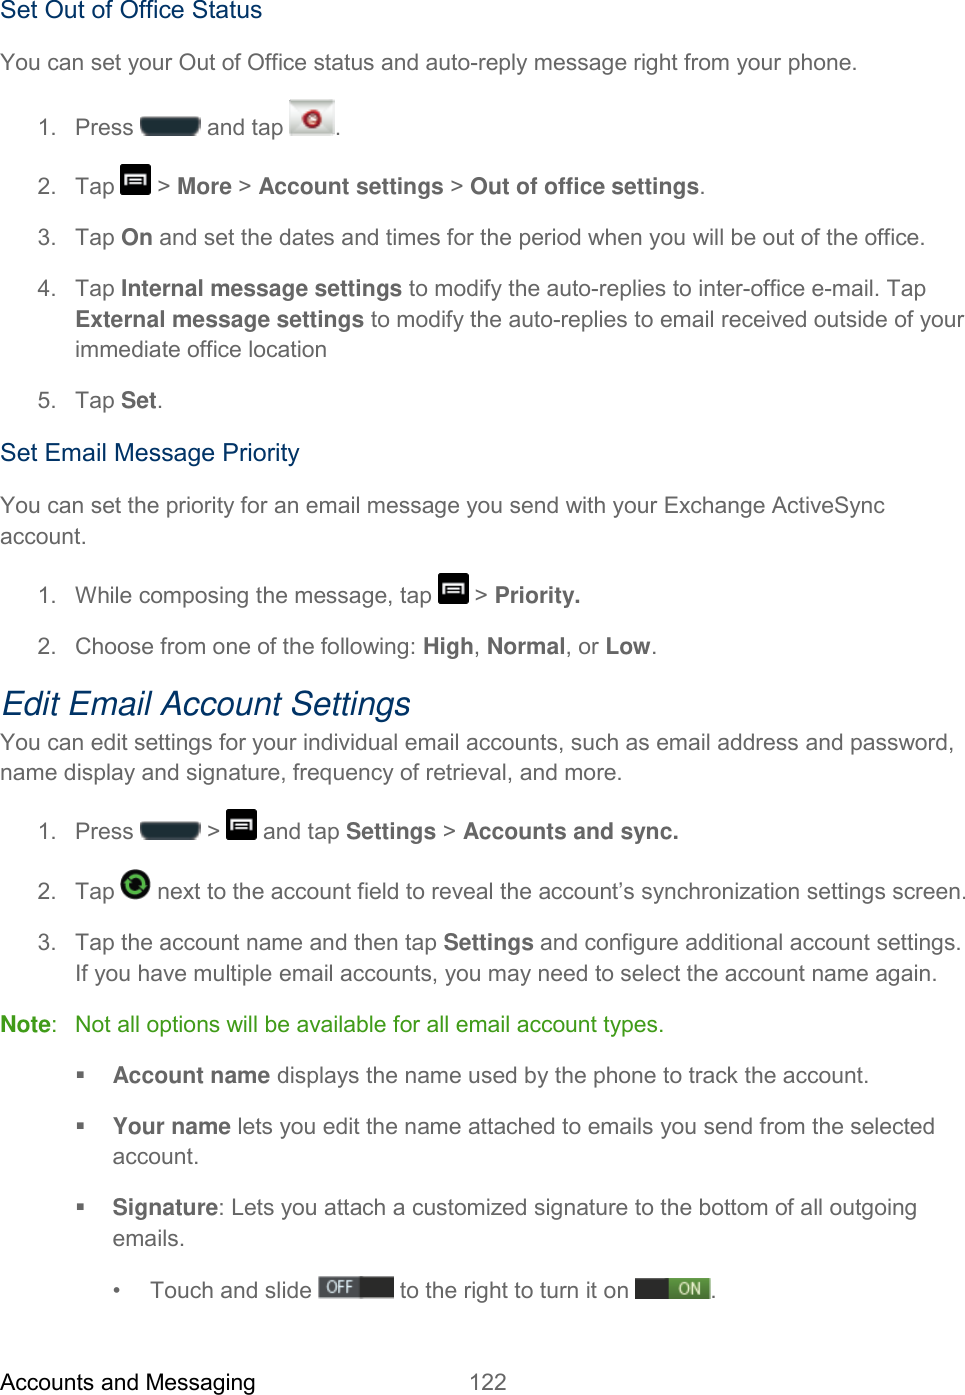 Accounts and Messaging 122   Set Out of Office Status You can set your Out of Office status and auto-reply message right from your phone. 1.  Press   and tap  . 2.  Tap   &gt; More &gt; Account settings &gt; Out of office settings. 3.  Tap On and set the dates and times for the period when you will be out of the office. 4.  Tap Internal message settings to modify the auto-replies to inter-office e-mail. Tap External message settings to modify the auto-replies to email received outside of your immediate office location 5.  Tap Set. Set Email Message Priority You can set the priority for an email message you send with your Exchange ActiveSync account. 1.  While composing the message, tap   &gt; Priority. 2.  Choose from one of the following: High, Normal, or Low. Edit Email Account Settings You can edit settings for your individual email accounts, such as email address and password, name display and signature, frequency of retrieval, and more. 1.  Press   &gt;   and tap Settings &gt; Accounts and sync. 2.  Tap   next to the account field to reveal the account’s synchronization settings screen. 3.  Tap the account name and then tap Settings and configure additional account settings. If you have multiple email accounts, you may need to select the account name again. Note:   Not all options will be available for all email account types.  Account name displays the name used by the phone to track the account.  Your name lets you edit the name attached to emails you send from the selected account.  Signature: Lets you attach a customized signature to the bottom of all outgoing emails. •  Touch and slide   to the right to turn it on  .  